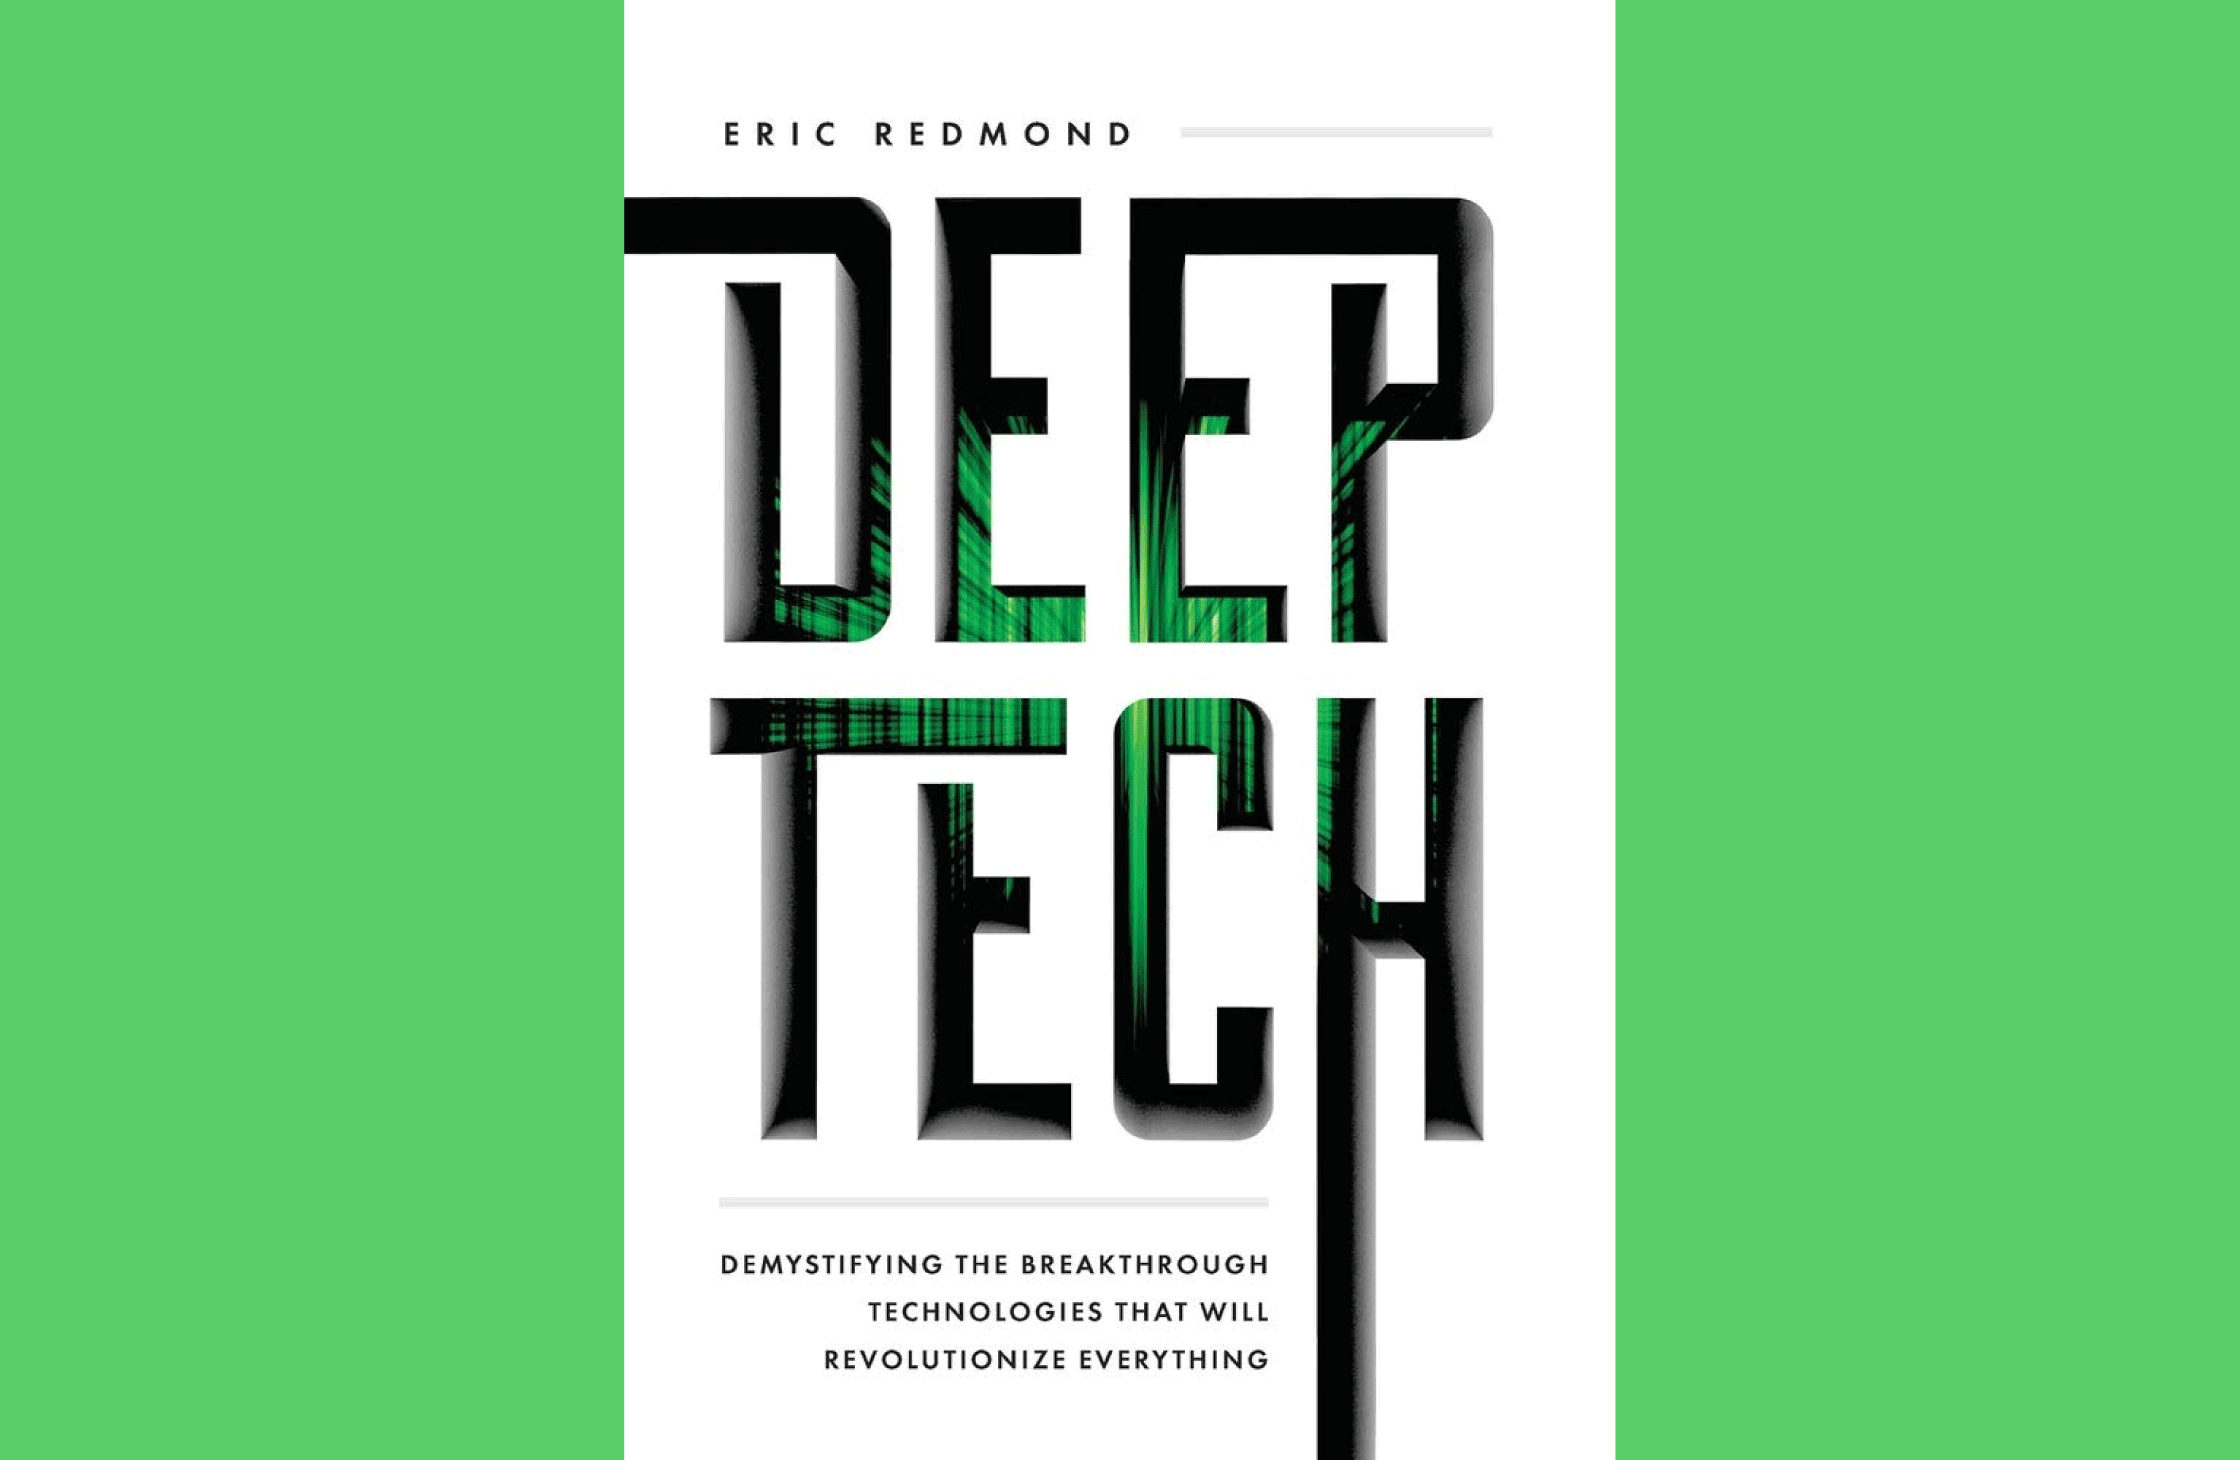 Summary: Deep Tech: Demystifying the Breakthrough Technologies That Will Revolutionize Everything by Eric Redmond